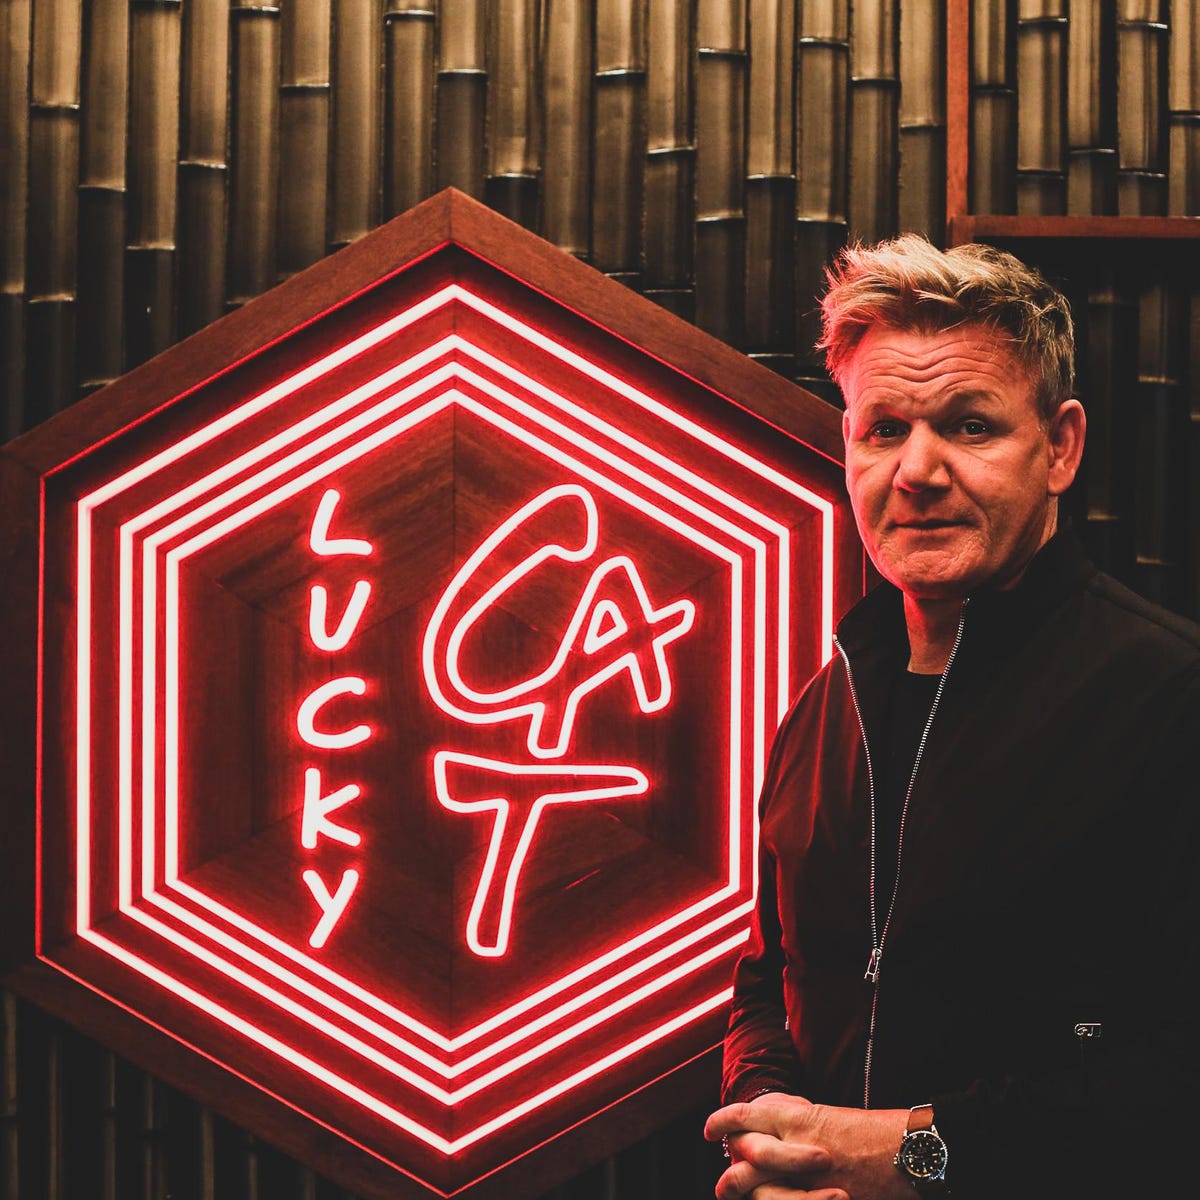 NEWS: Gordon Ramsay's Lucky Cat brand reportedly looking at opening a noodle bar in Shoreditch on Kingsland High Road https://t.co/b3d0DCuAsL